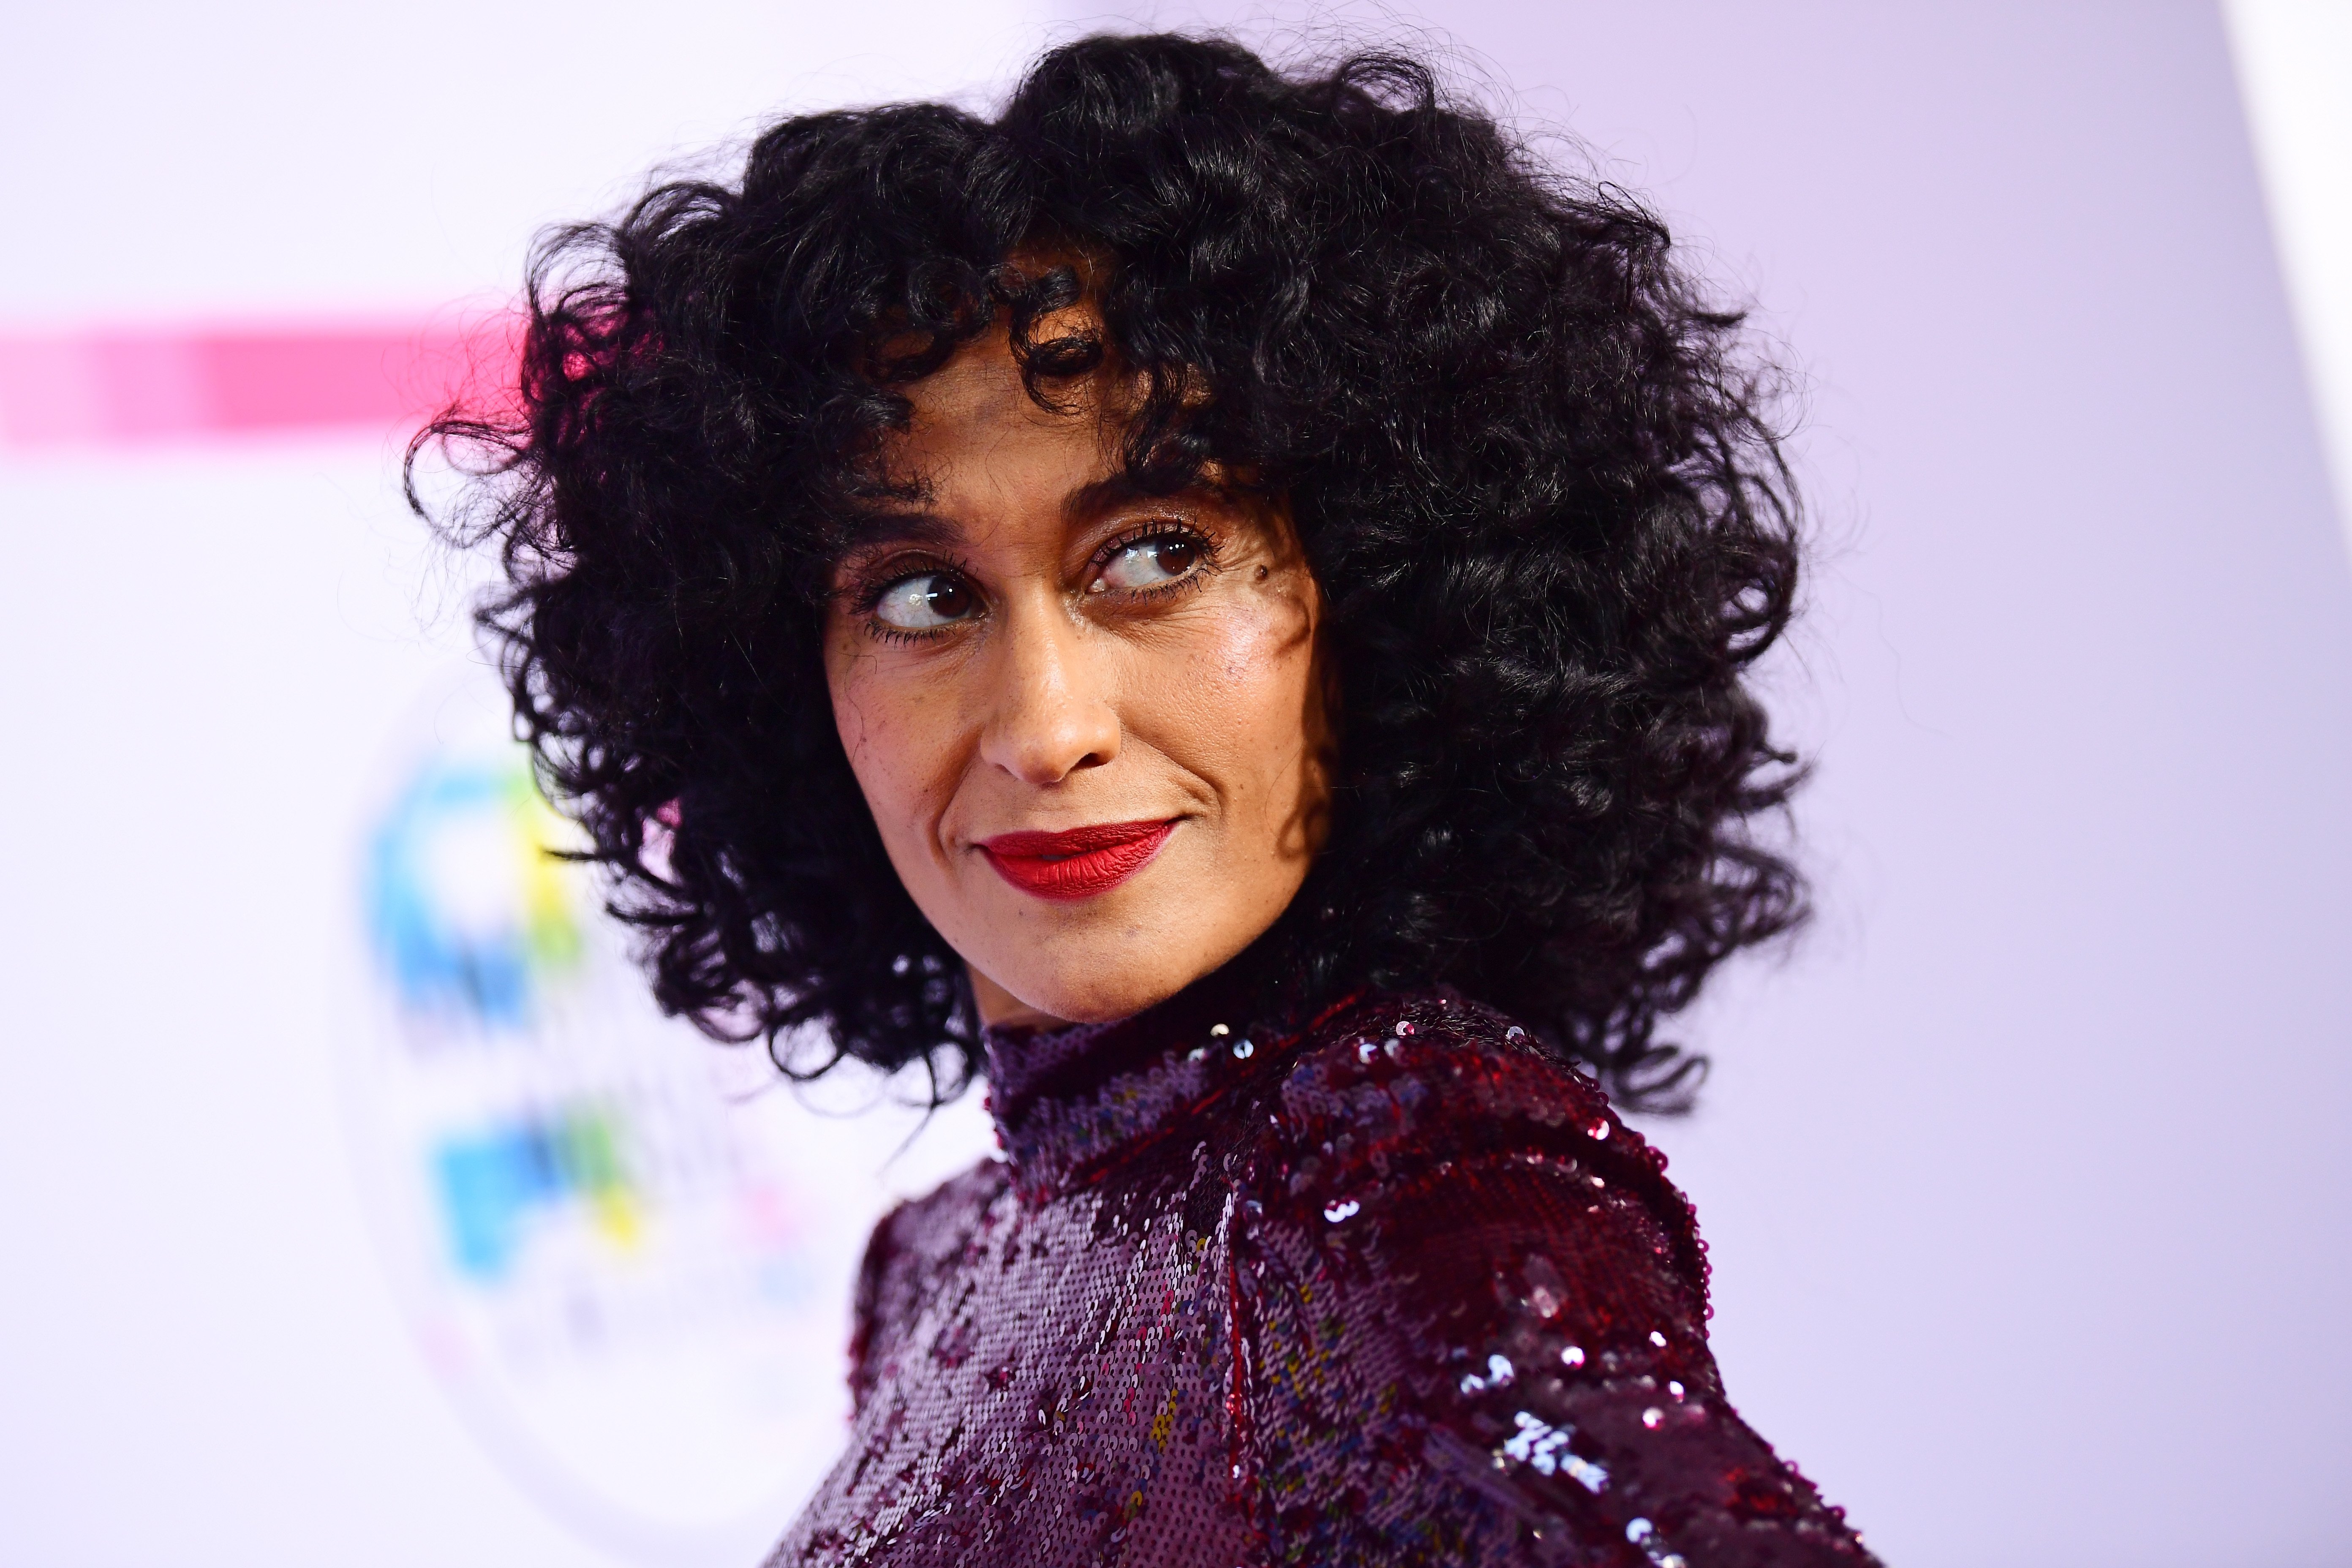 Tracee Ellis Ross at Microsoft Theater for the 2017 American Music Awards in Los Angeles, on November 19, 2017. | Photo: Getty Images